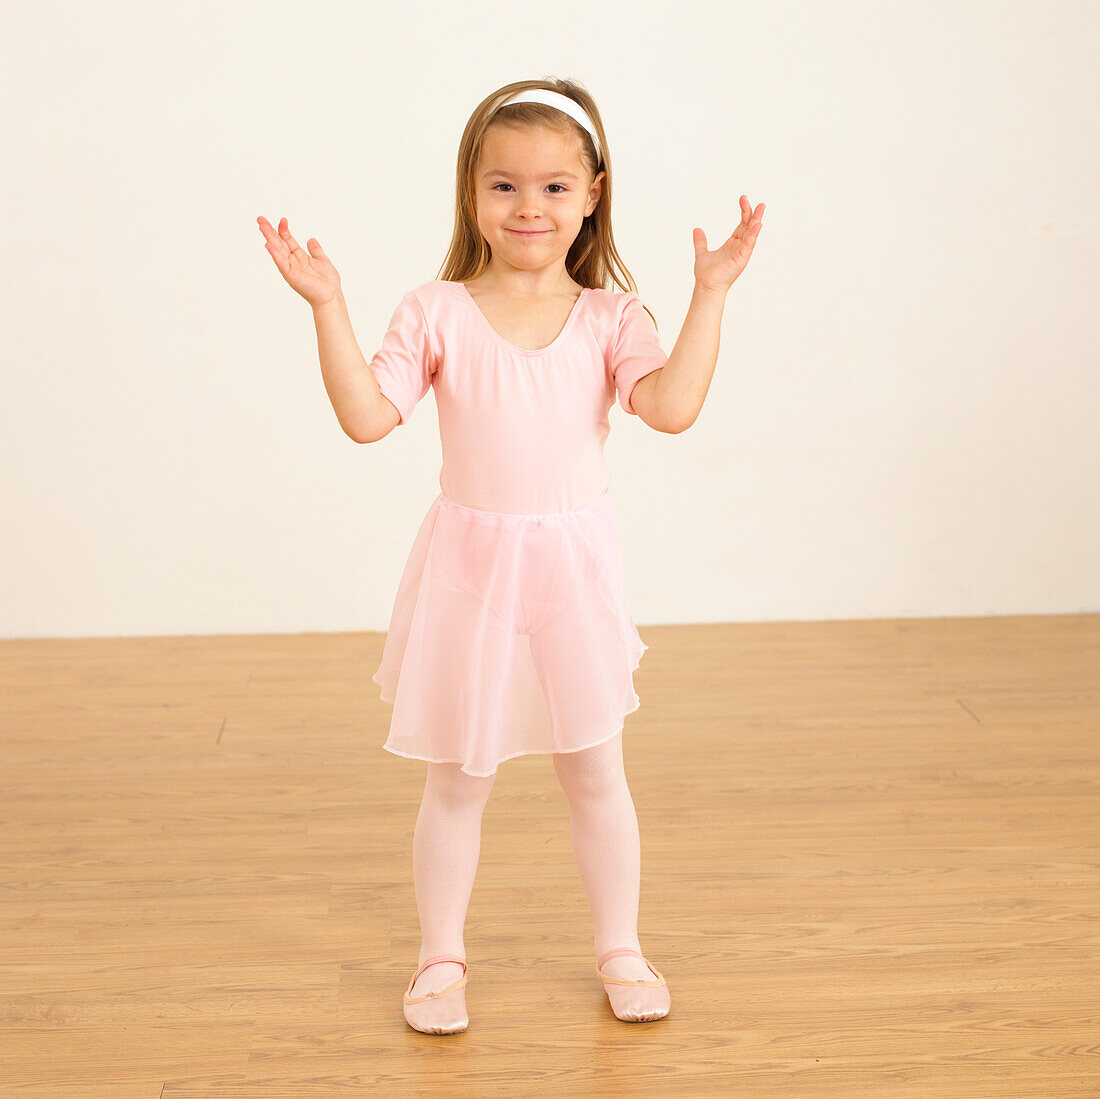 Girl in ballerina outfit standing with hands raised